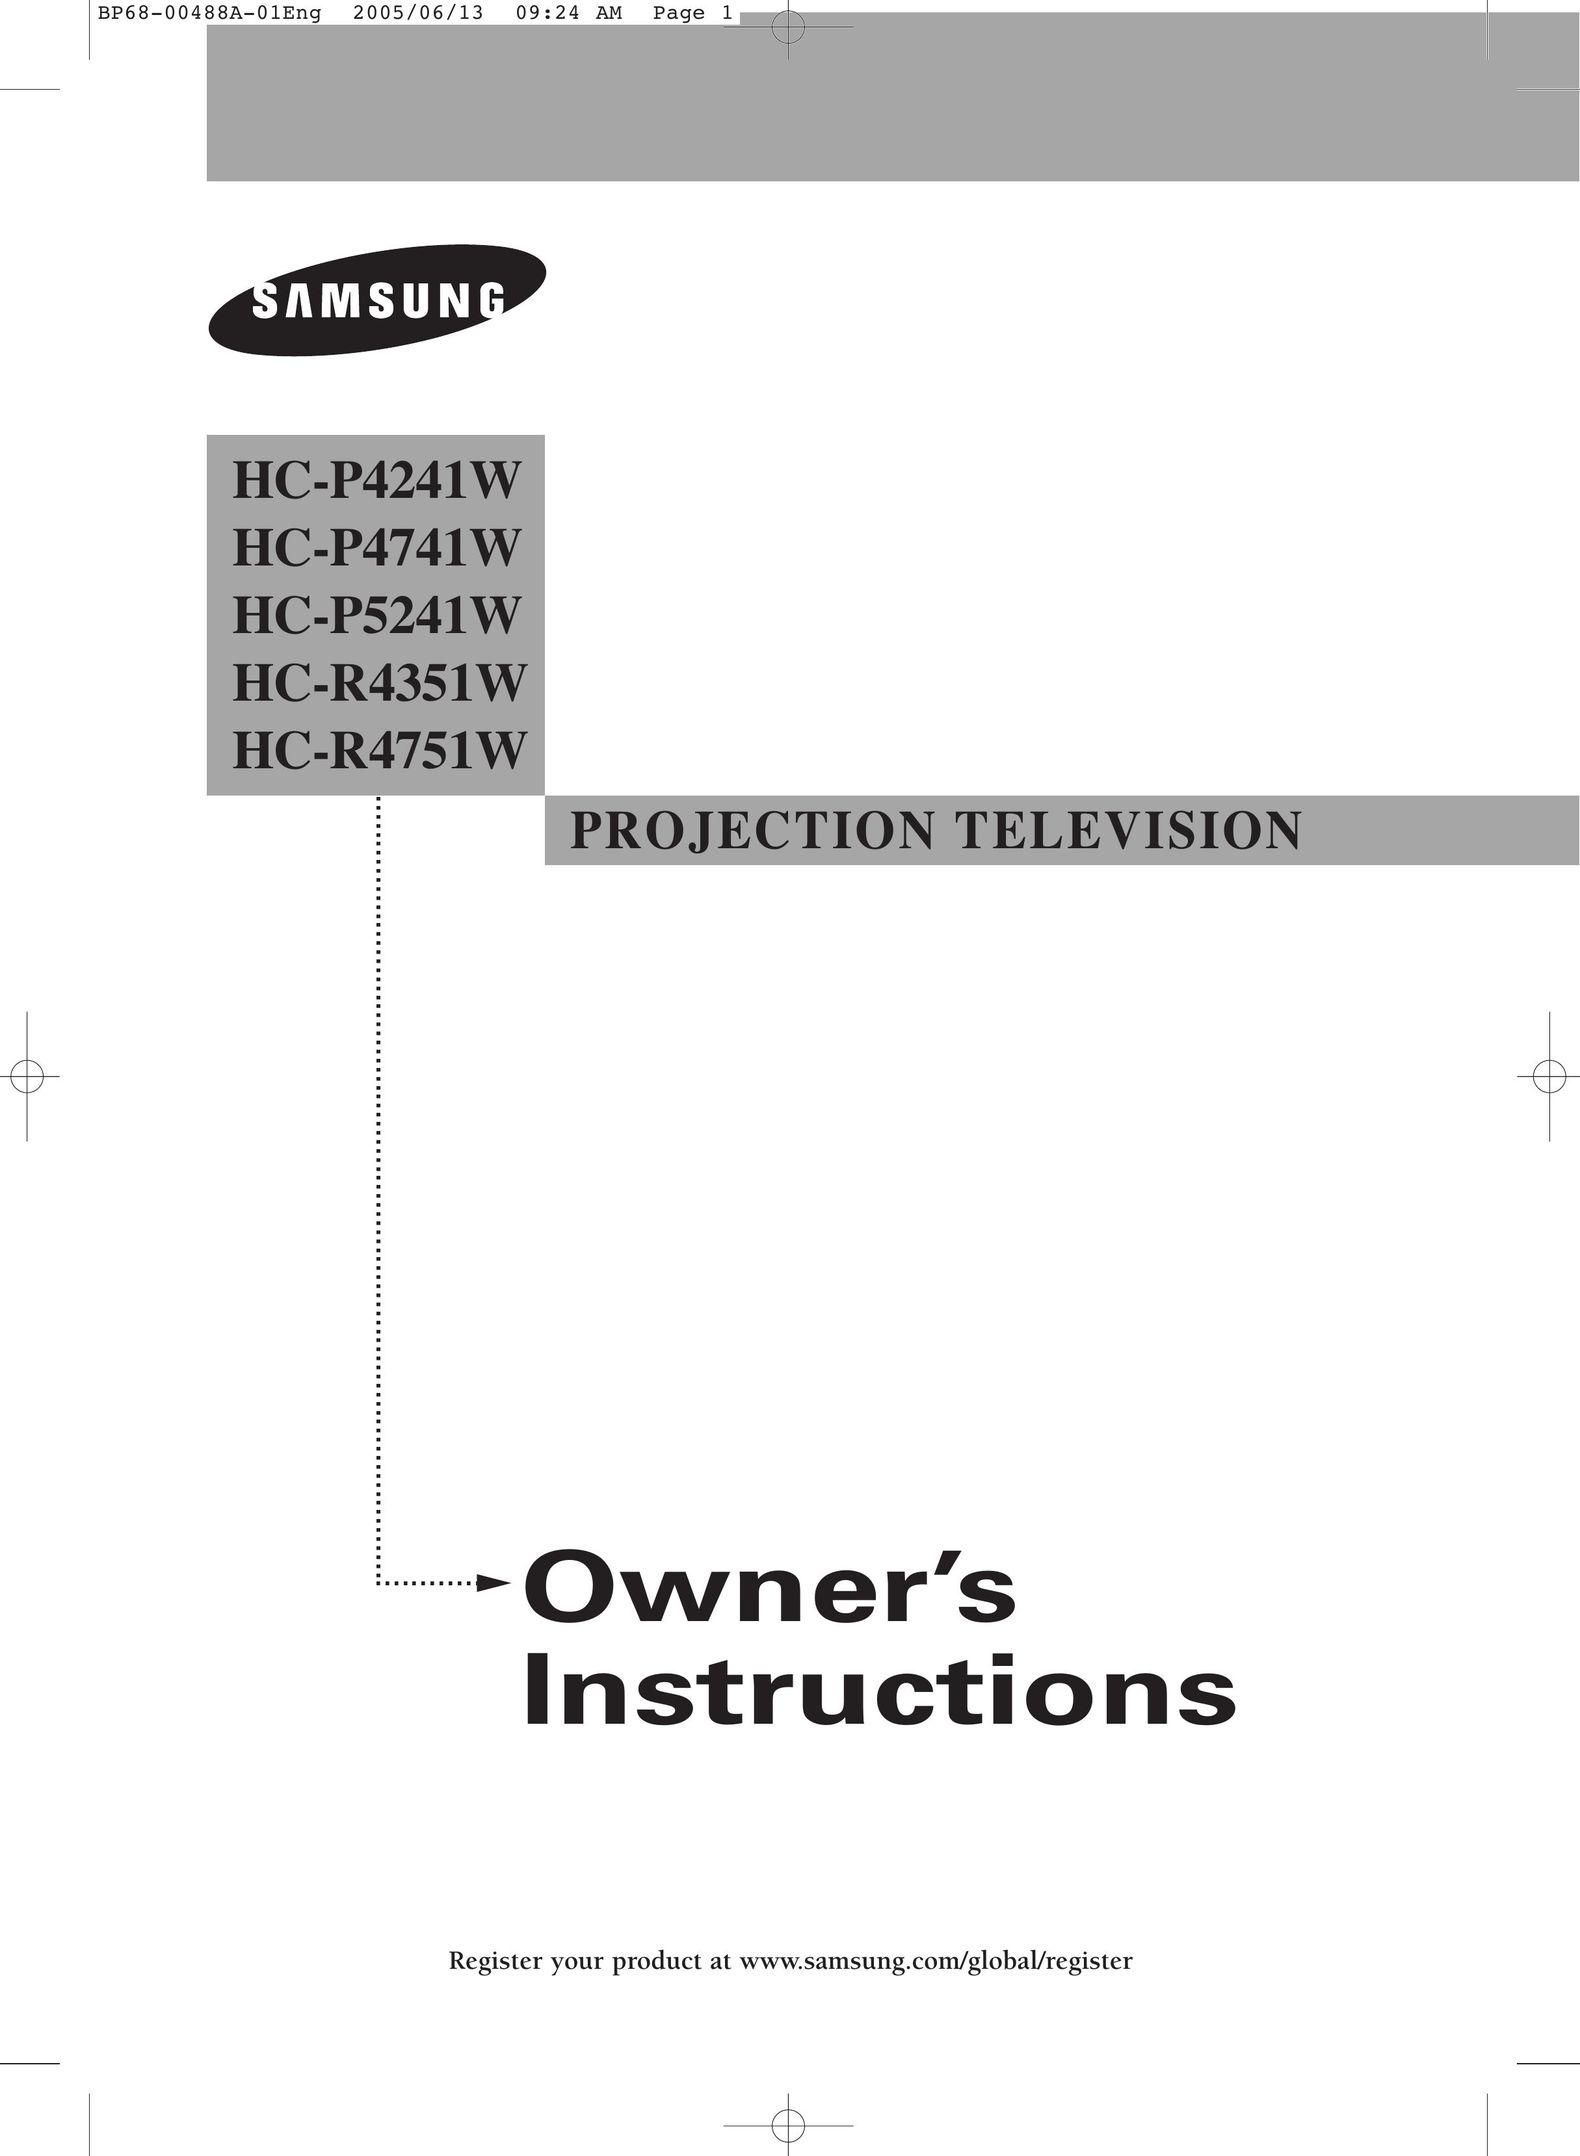 Samsung HC-P4741W Projection Television User Manual